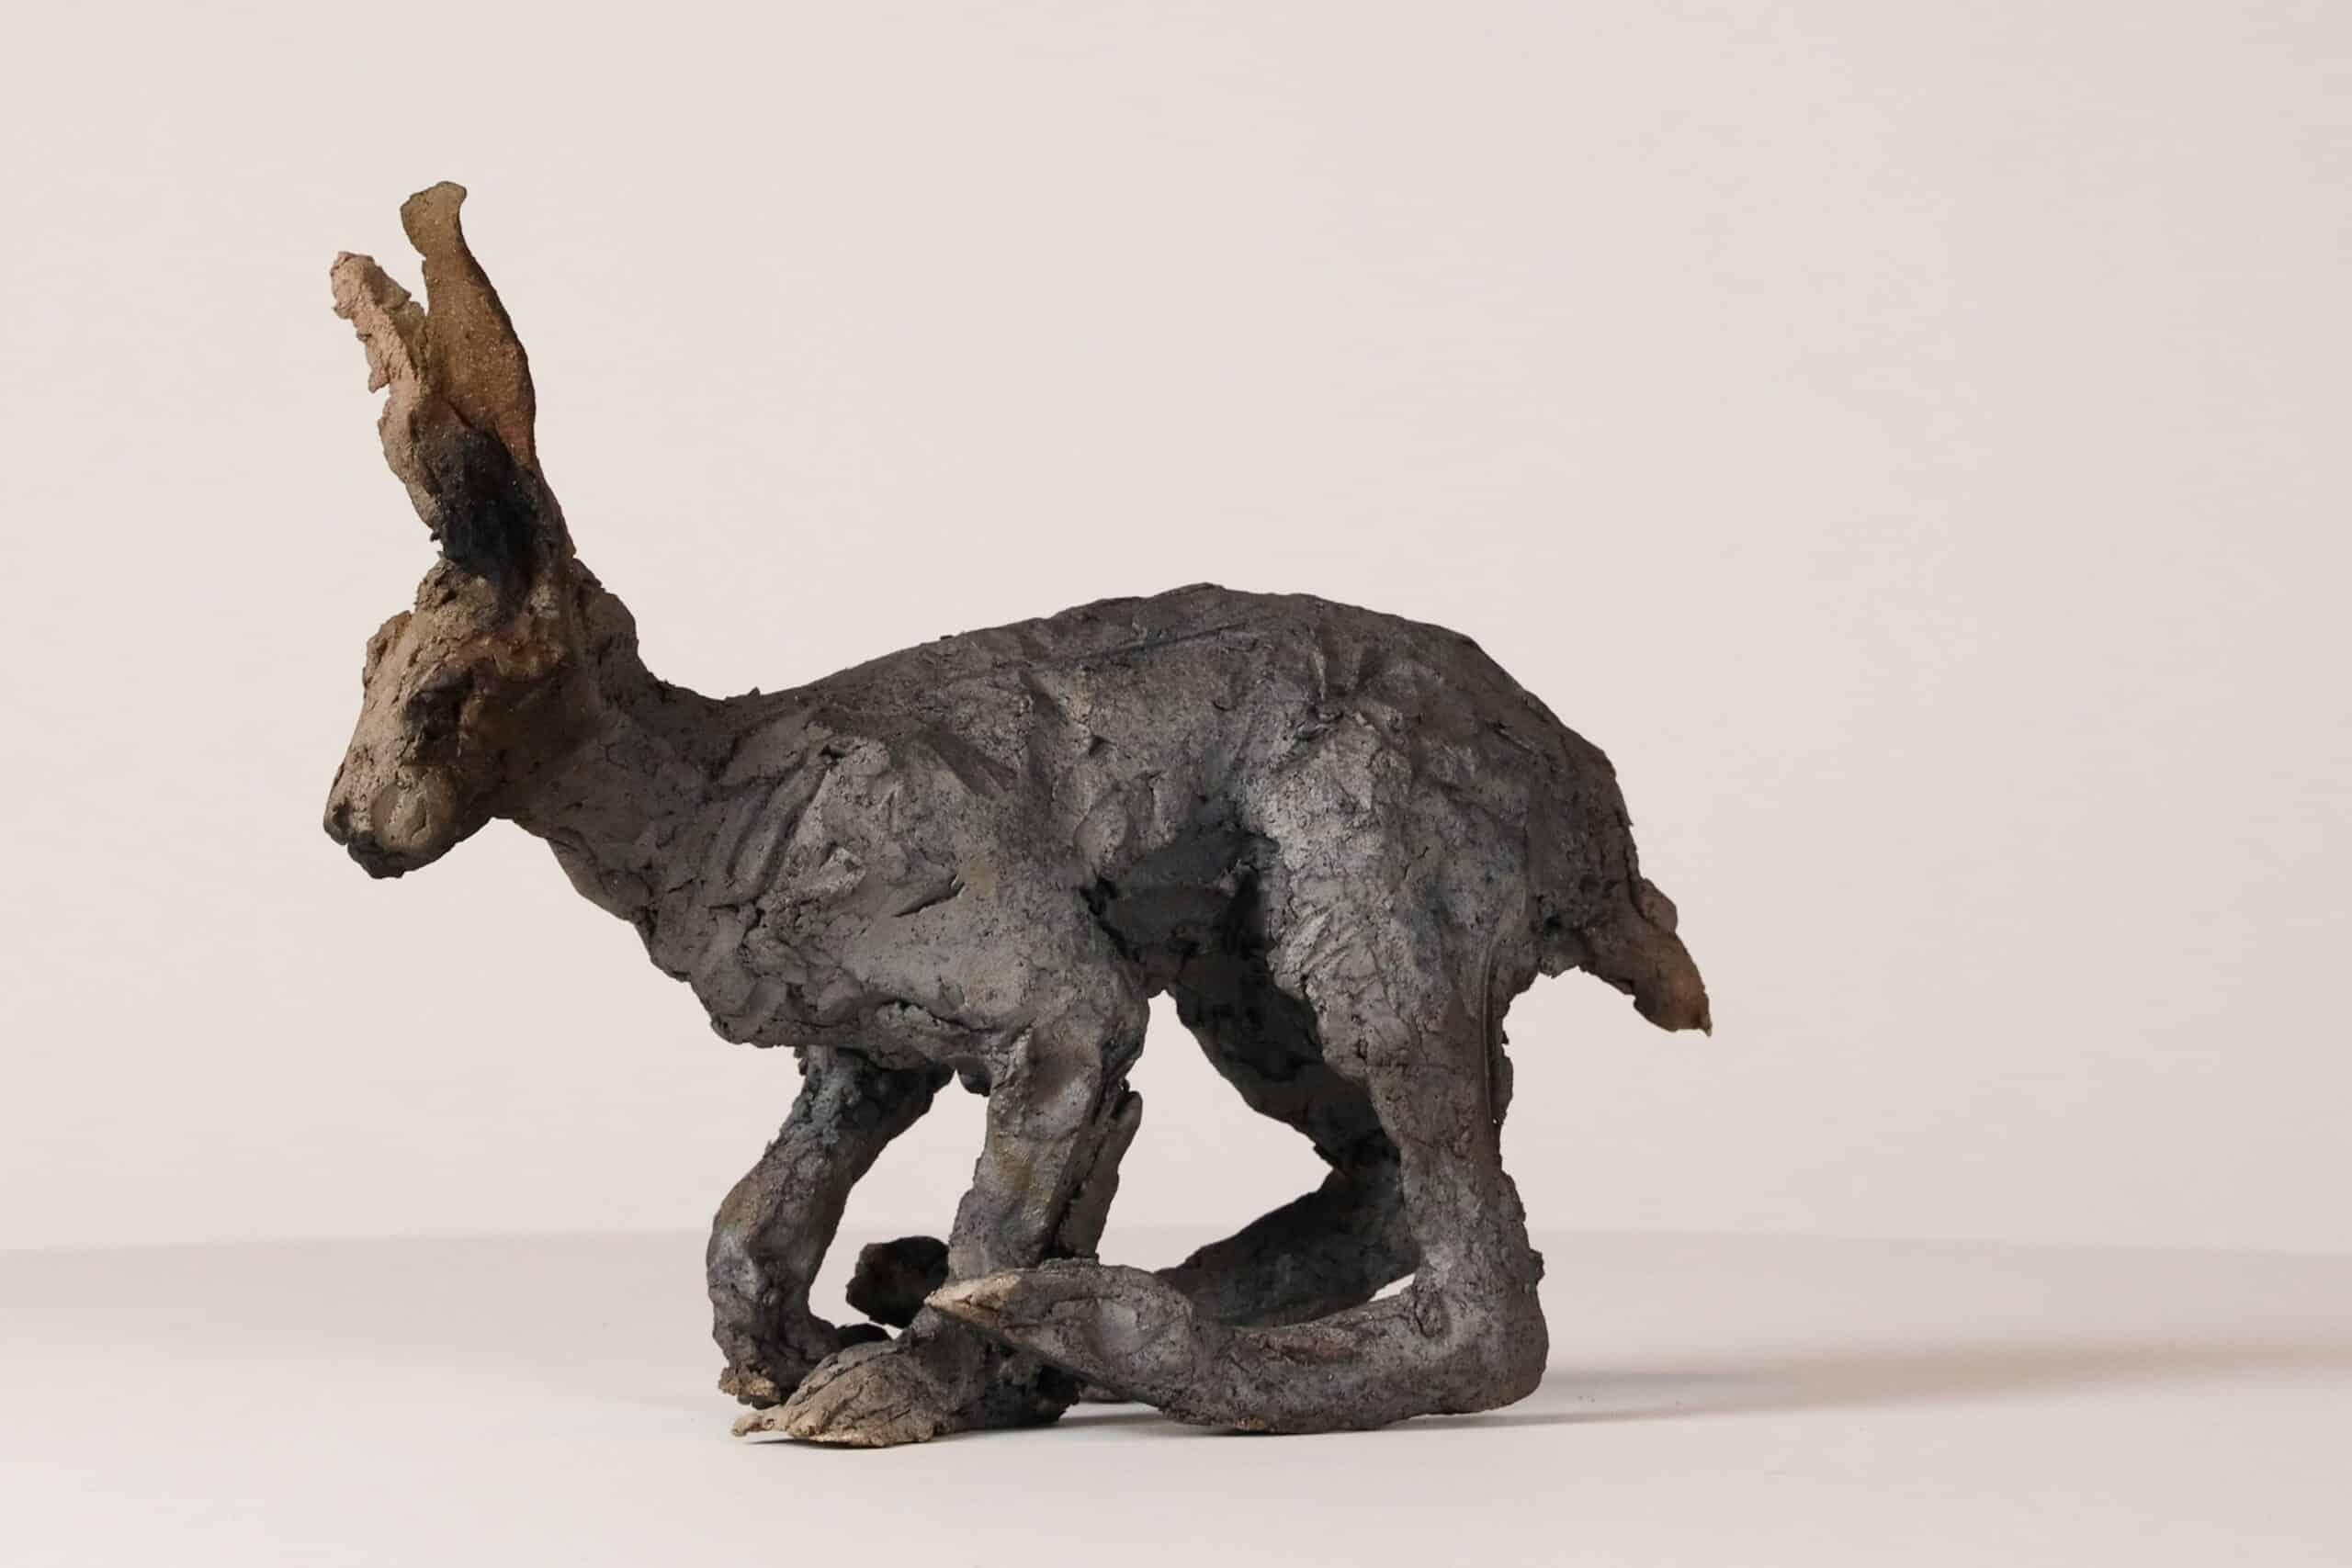 Hare is a unique smoke-fired stoneware sculpture by French contemporary artist Cécile Raynal, dimensions are 22 × 27 × 11 cm (8.7 × 10.6 × 4.3 in). 
The sculpture is a unique piece signed by the artist and comes with a certificate of